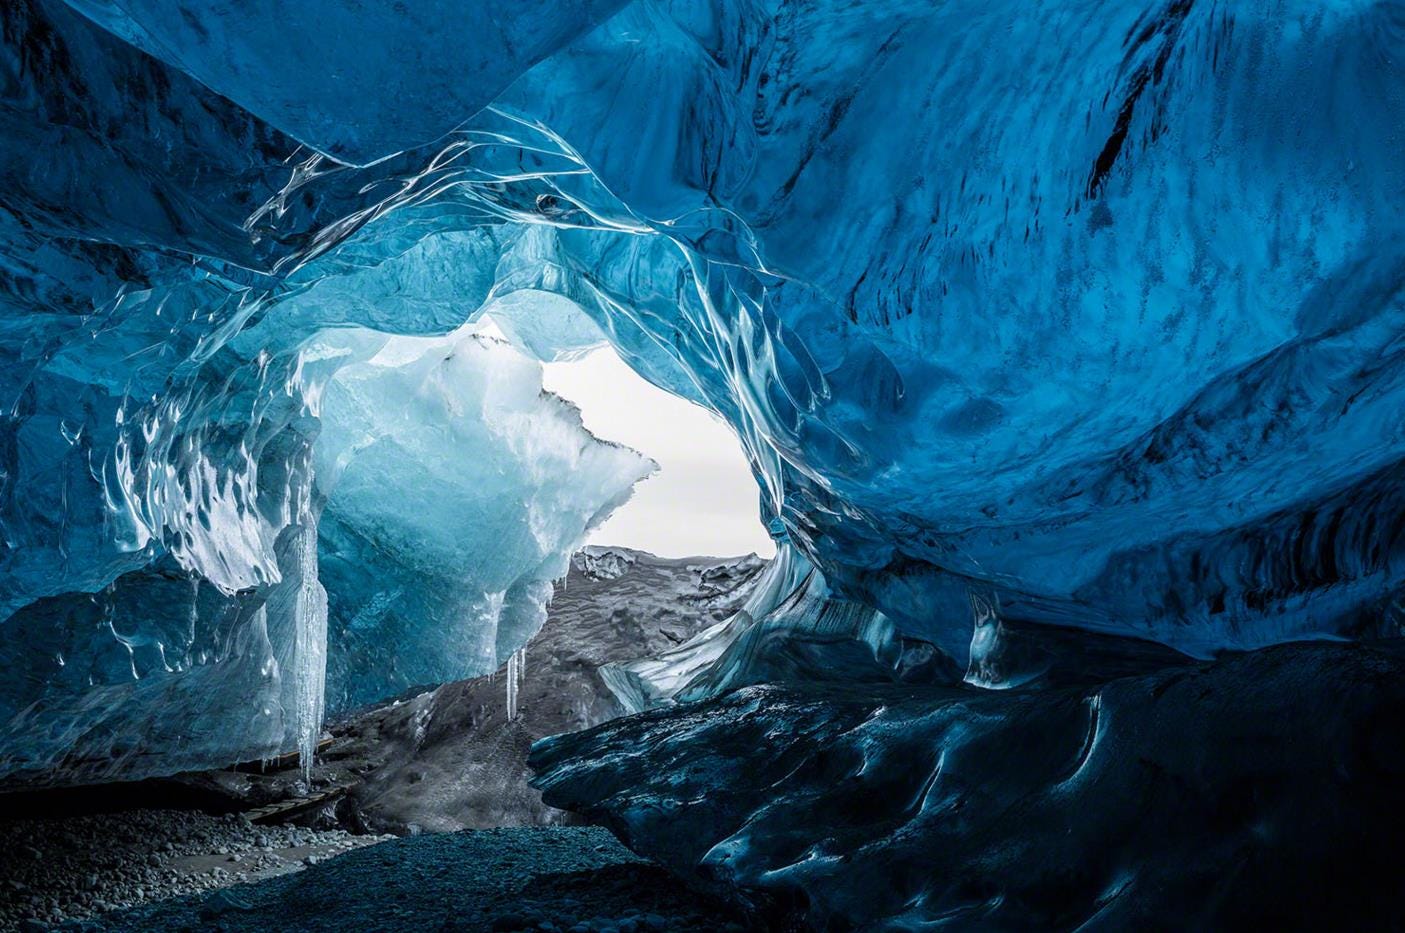 Gallery Photos of "Artic Cave" .